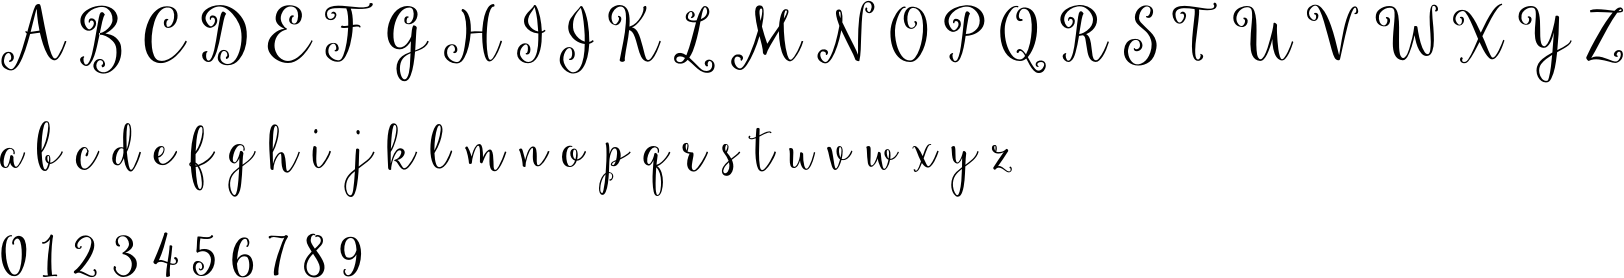 Margherite Script Character Map